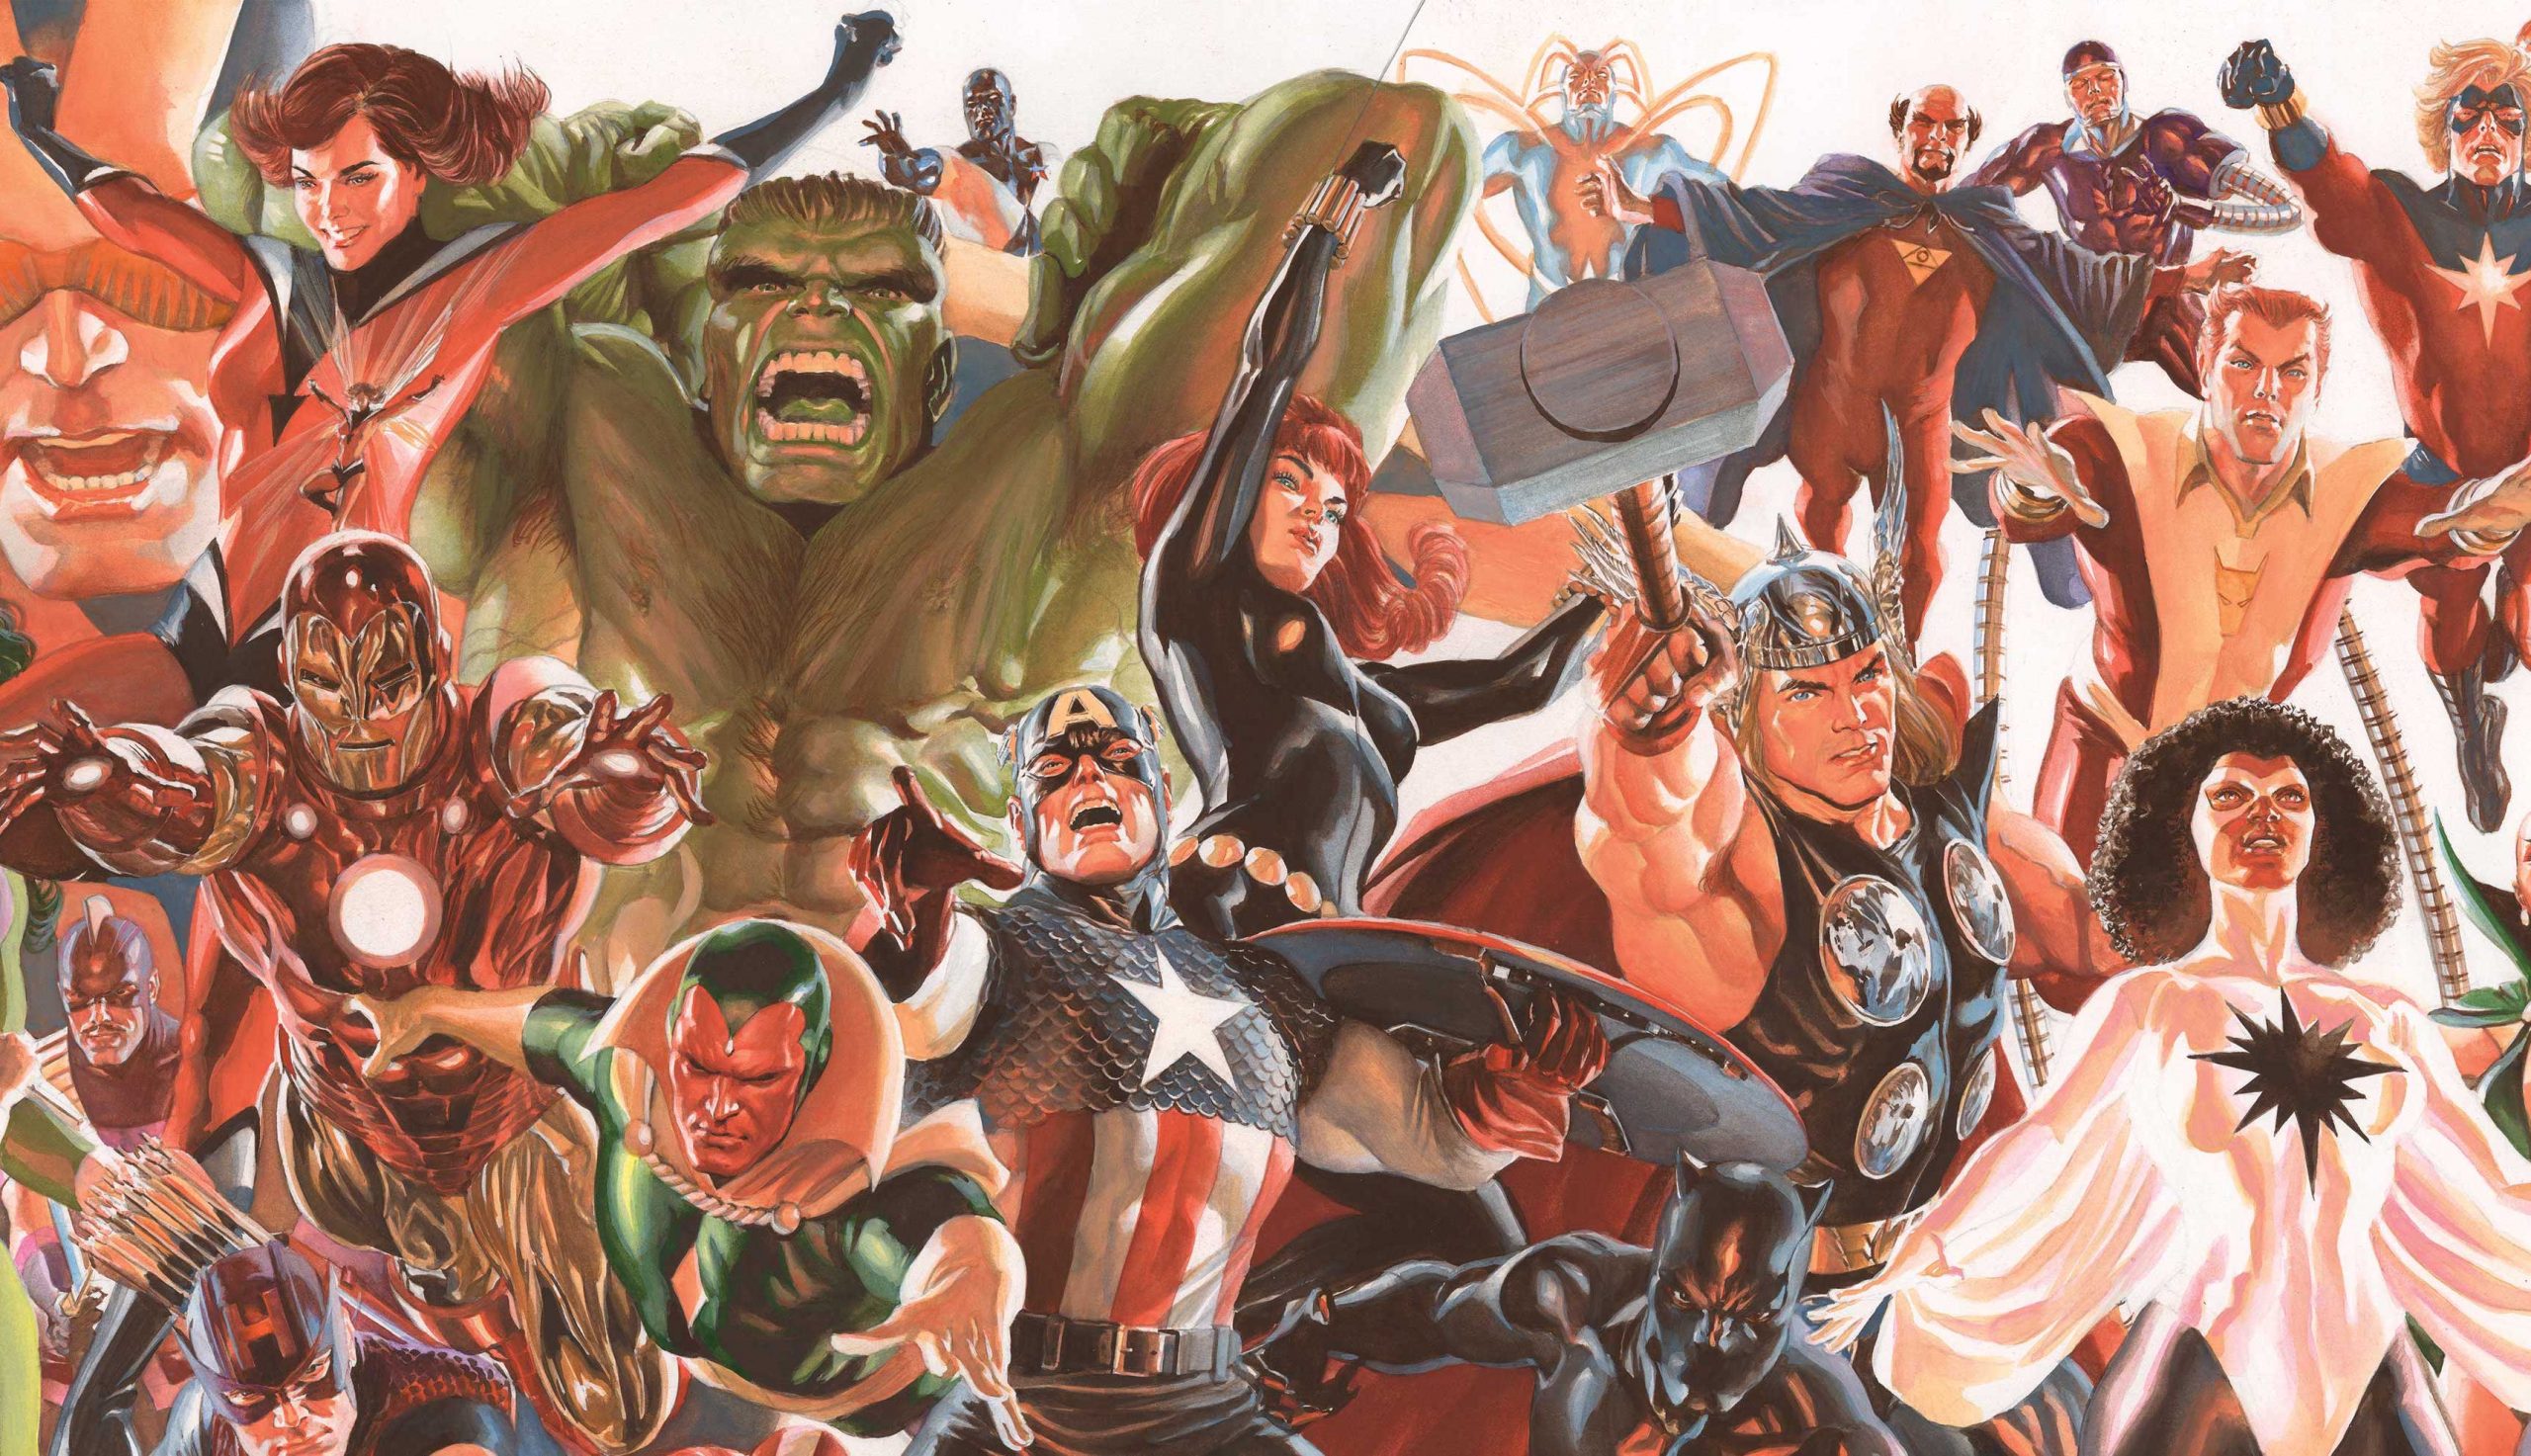 Alex Ross celebrates the Avengers and X-Men in new connecting variant cover